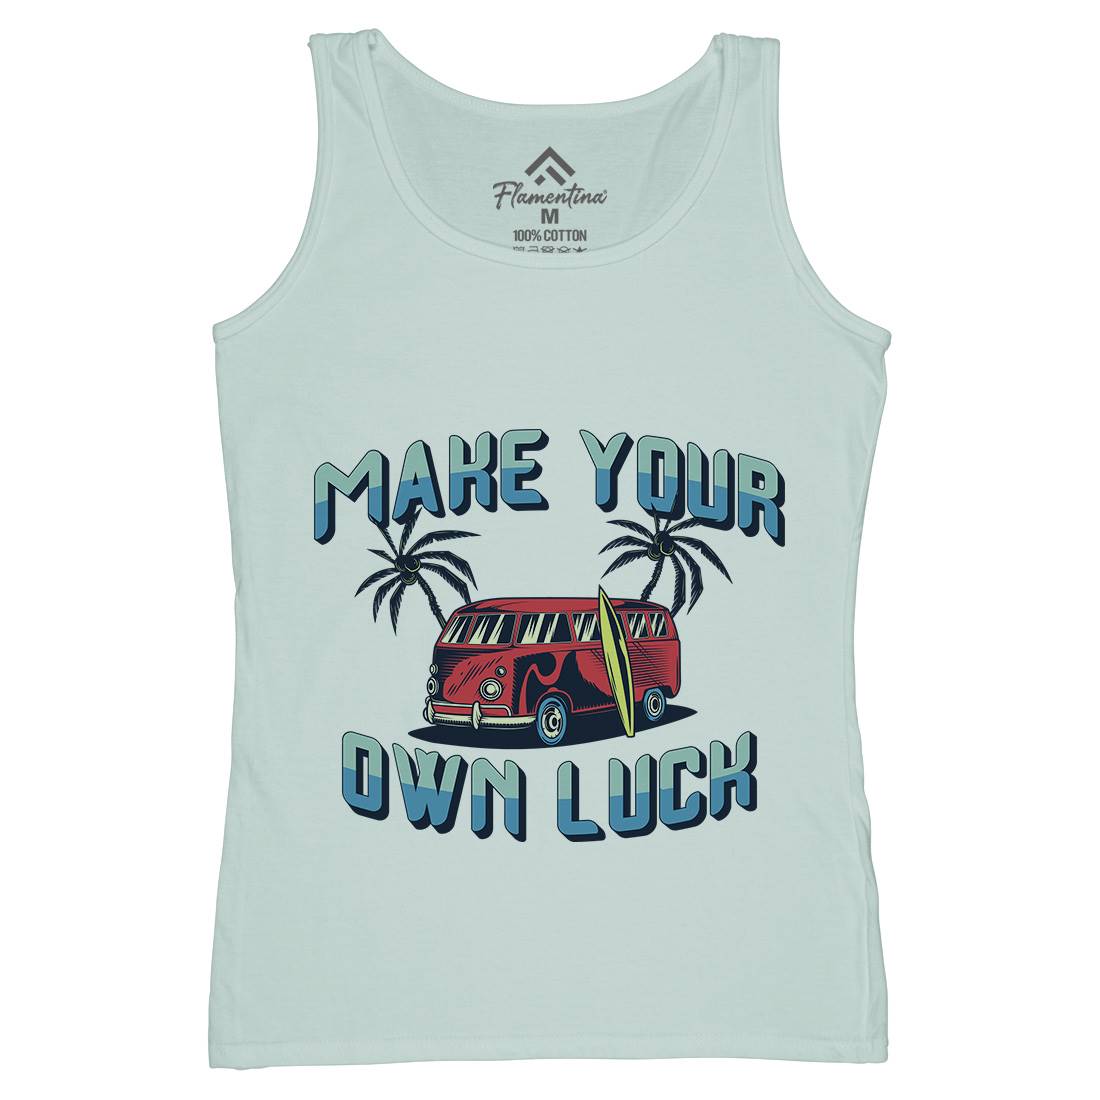 Make Your Own Luck Womens Organic Tank Top Vest Nature B307